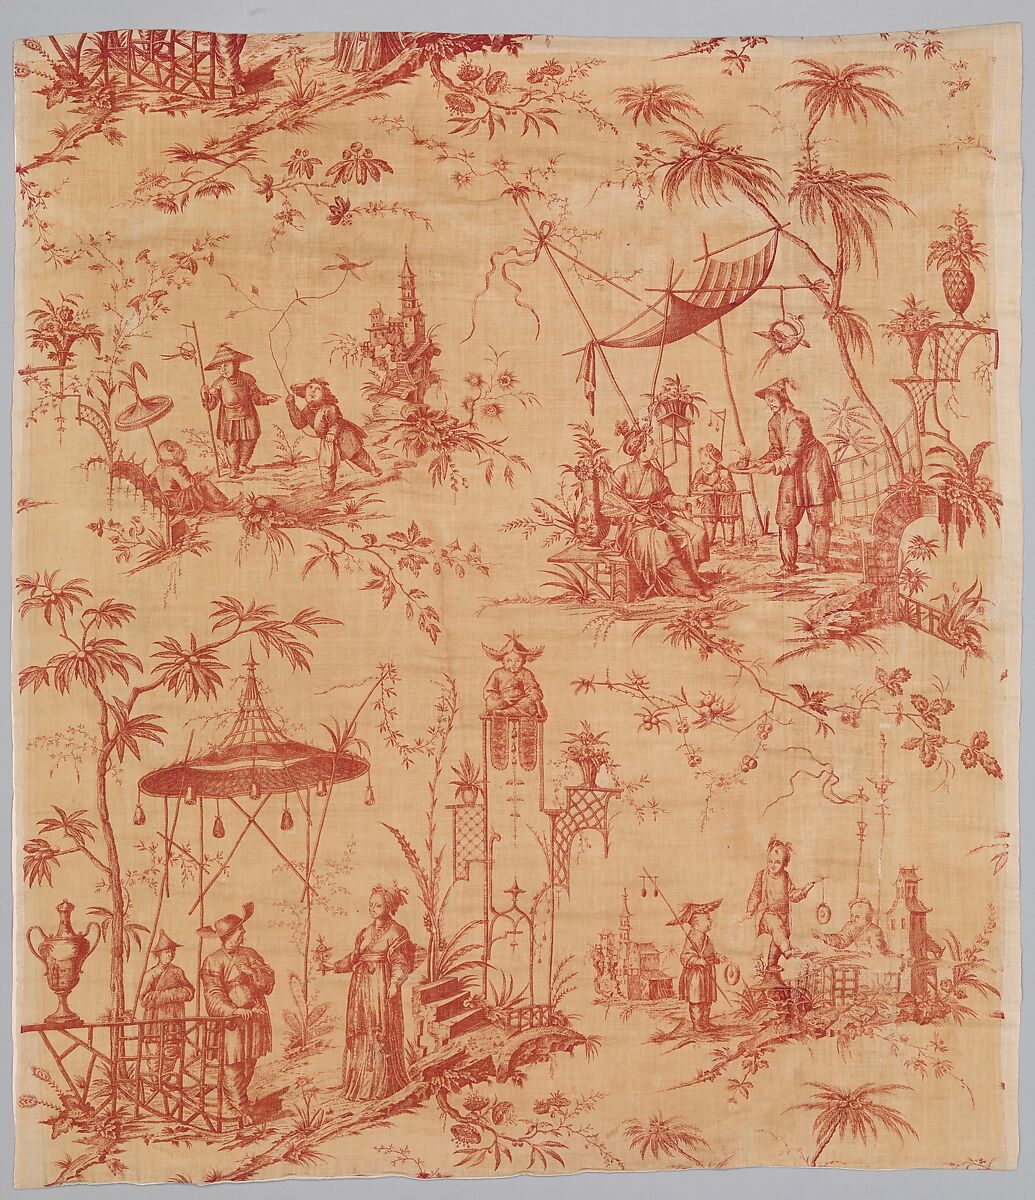 Pictorial print, Possibly Oberkampf Manufactory (French, active 1760–1843), Cotton, French, possibly Jouy-en-Josas 